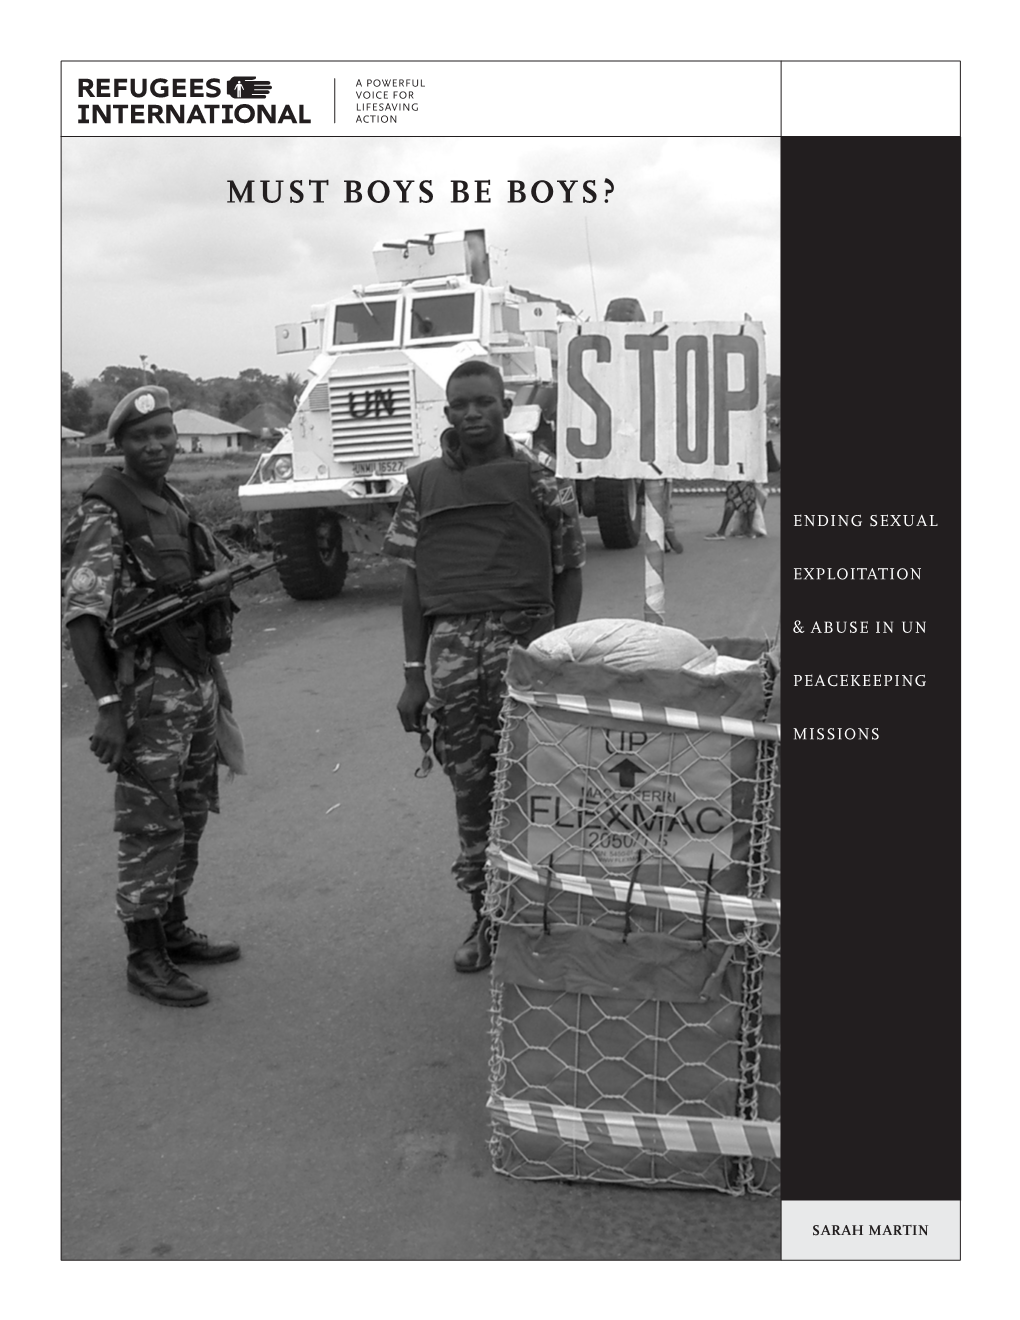 "Must Boys Be Boys? Ending Sexual Exploitation and Abuse in UN